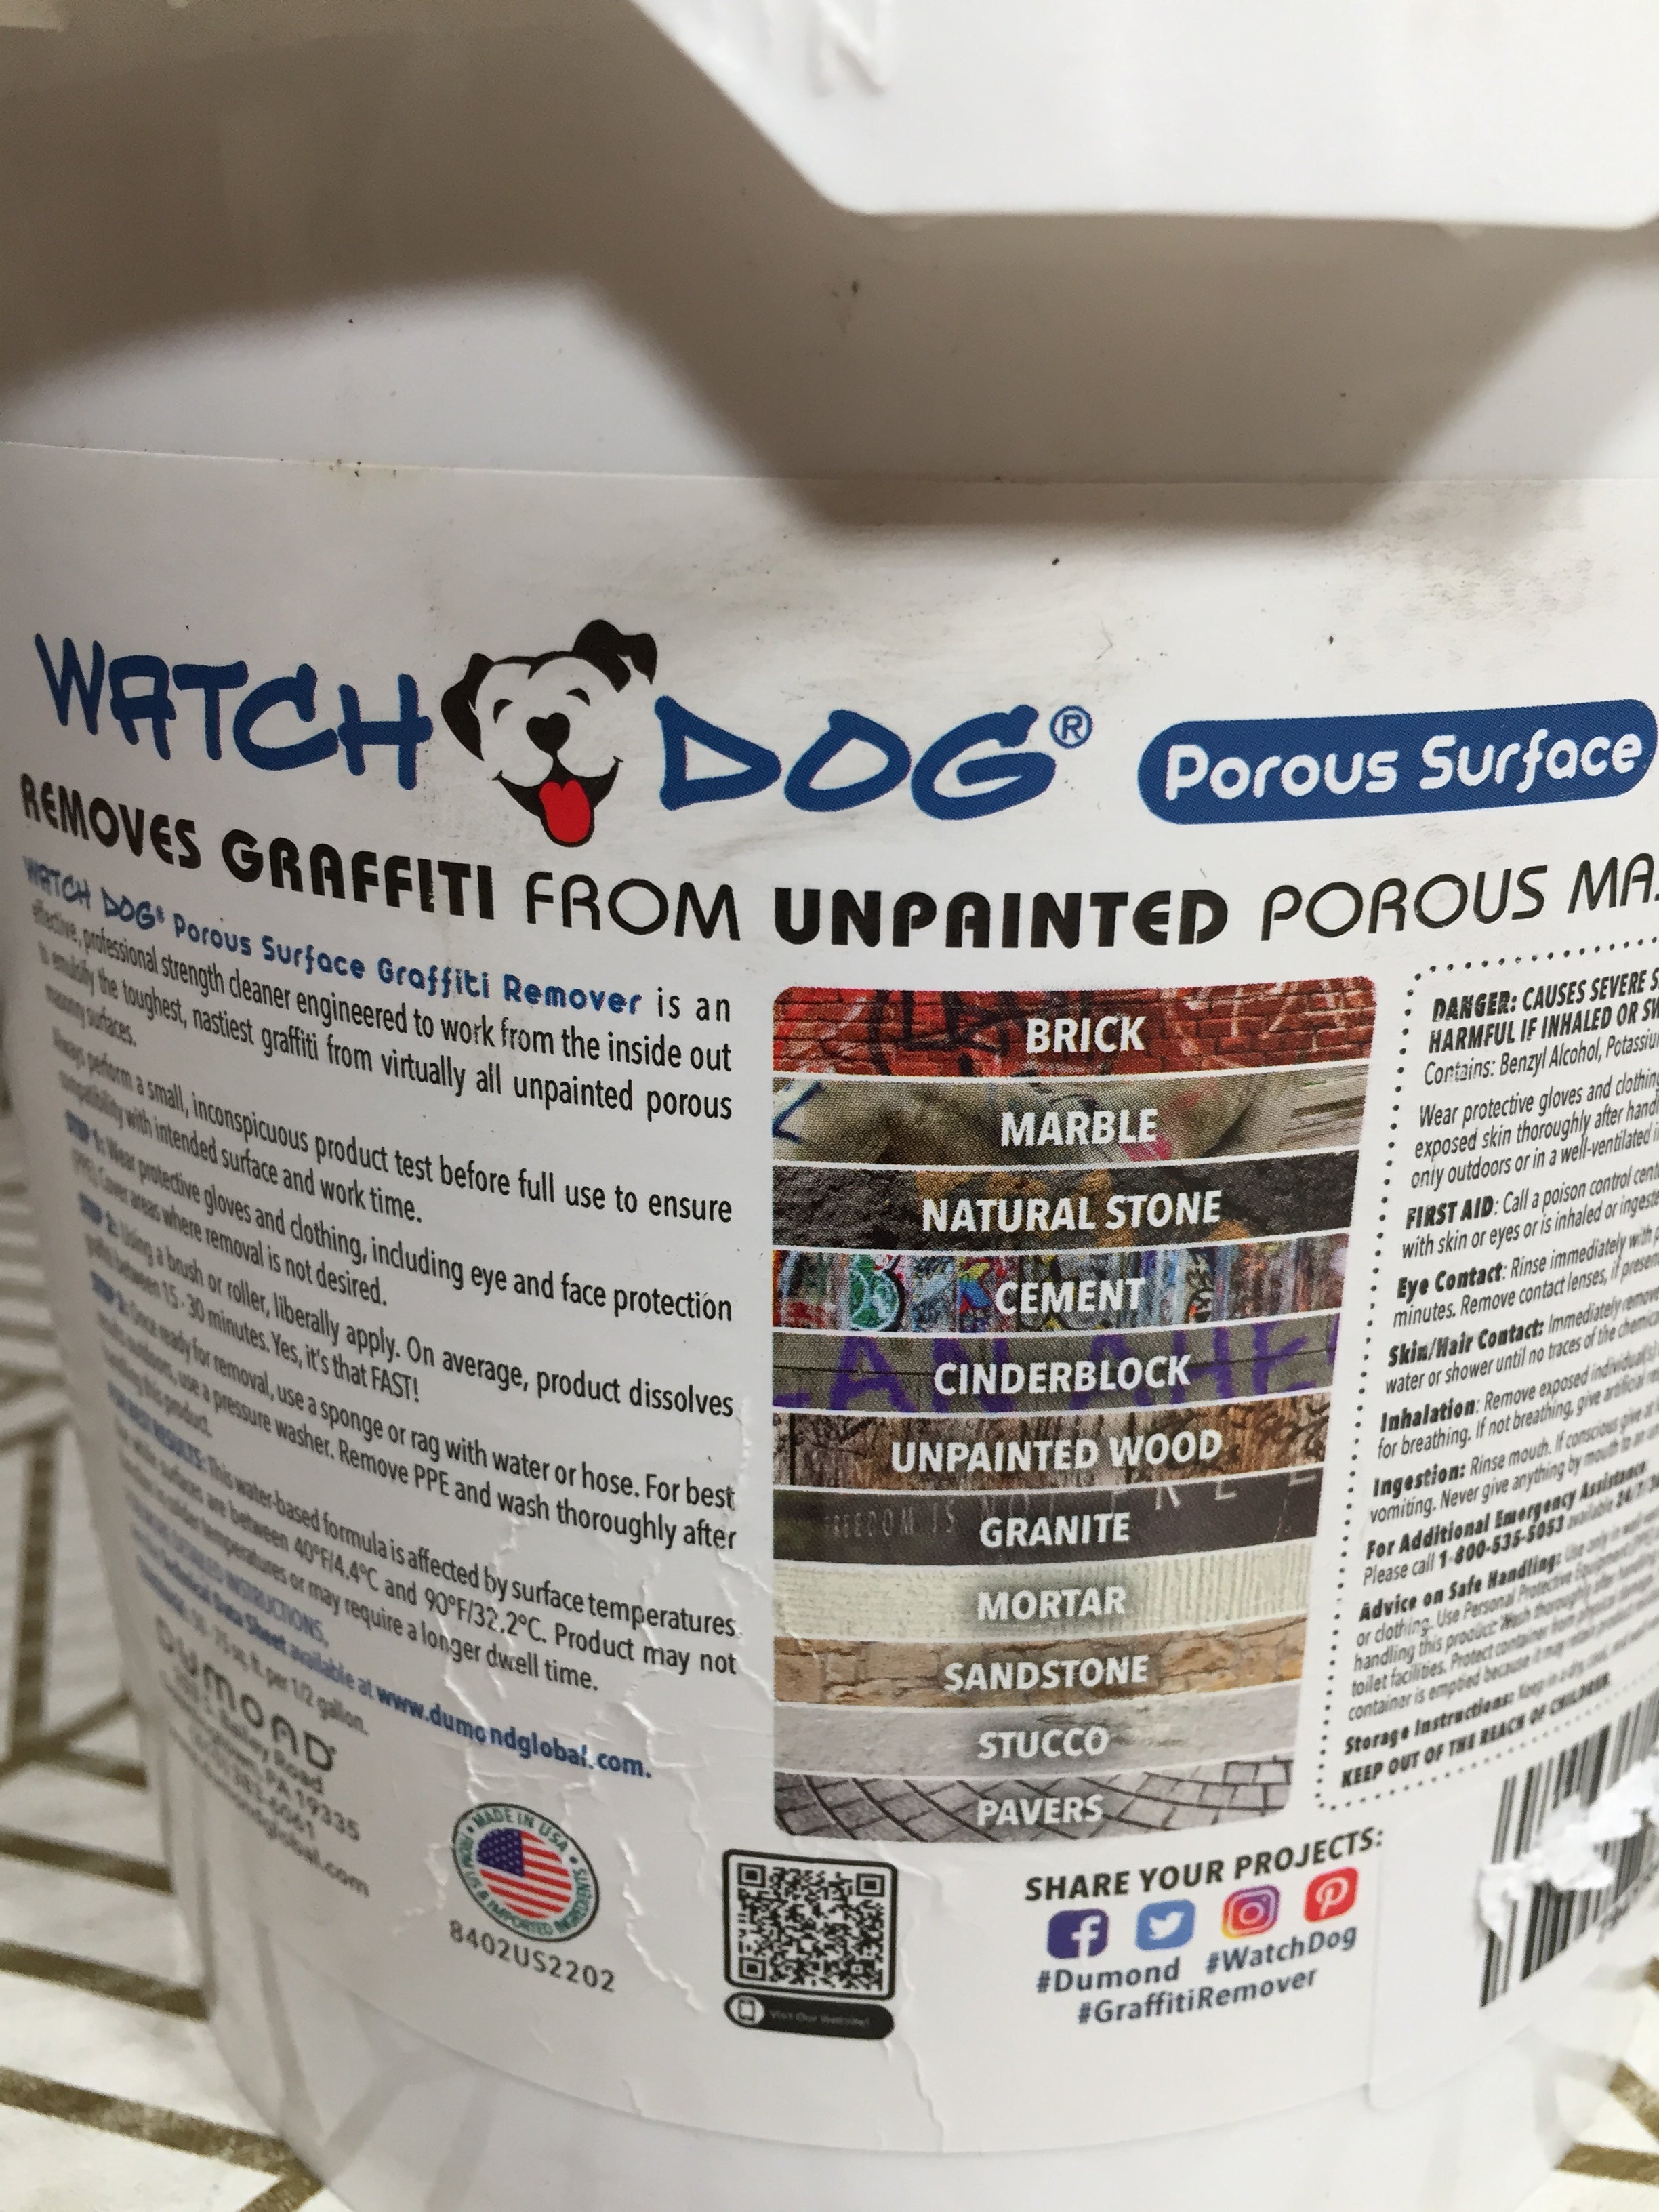 Dumond Chemicals 8402 Watch Dog Wipe Out Porous Surface Graffiti Remover *NEW* (8141239353582)